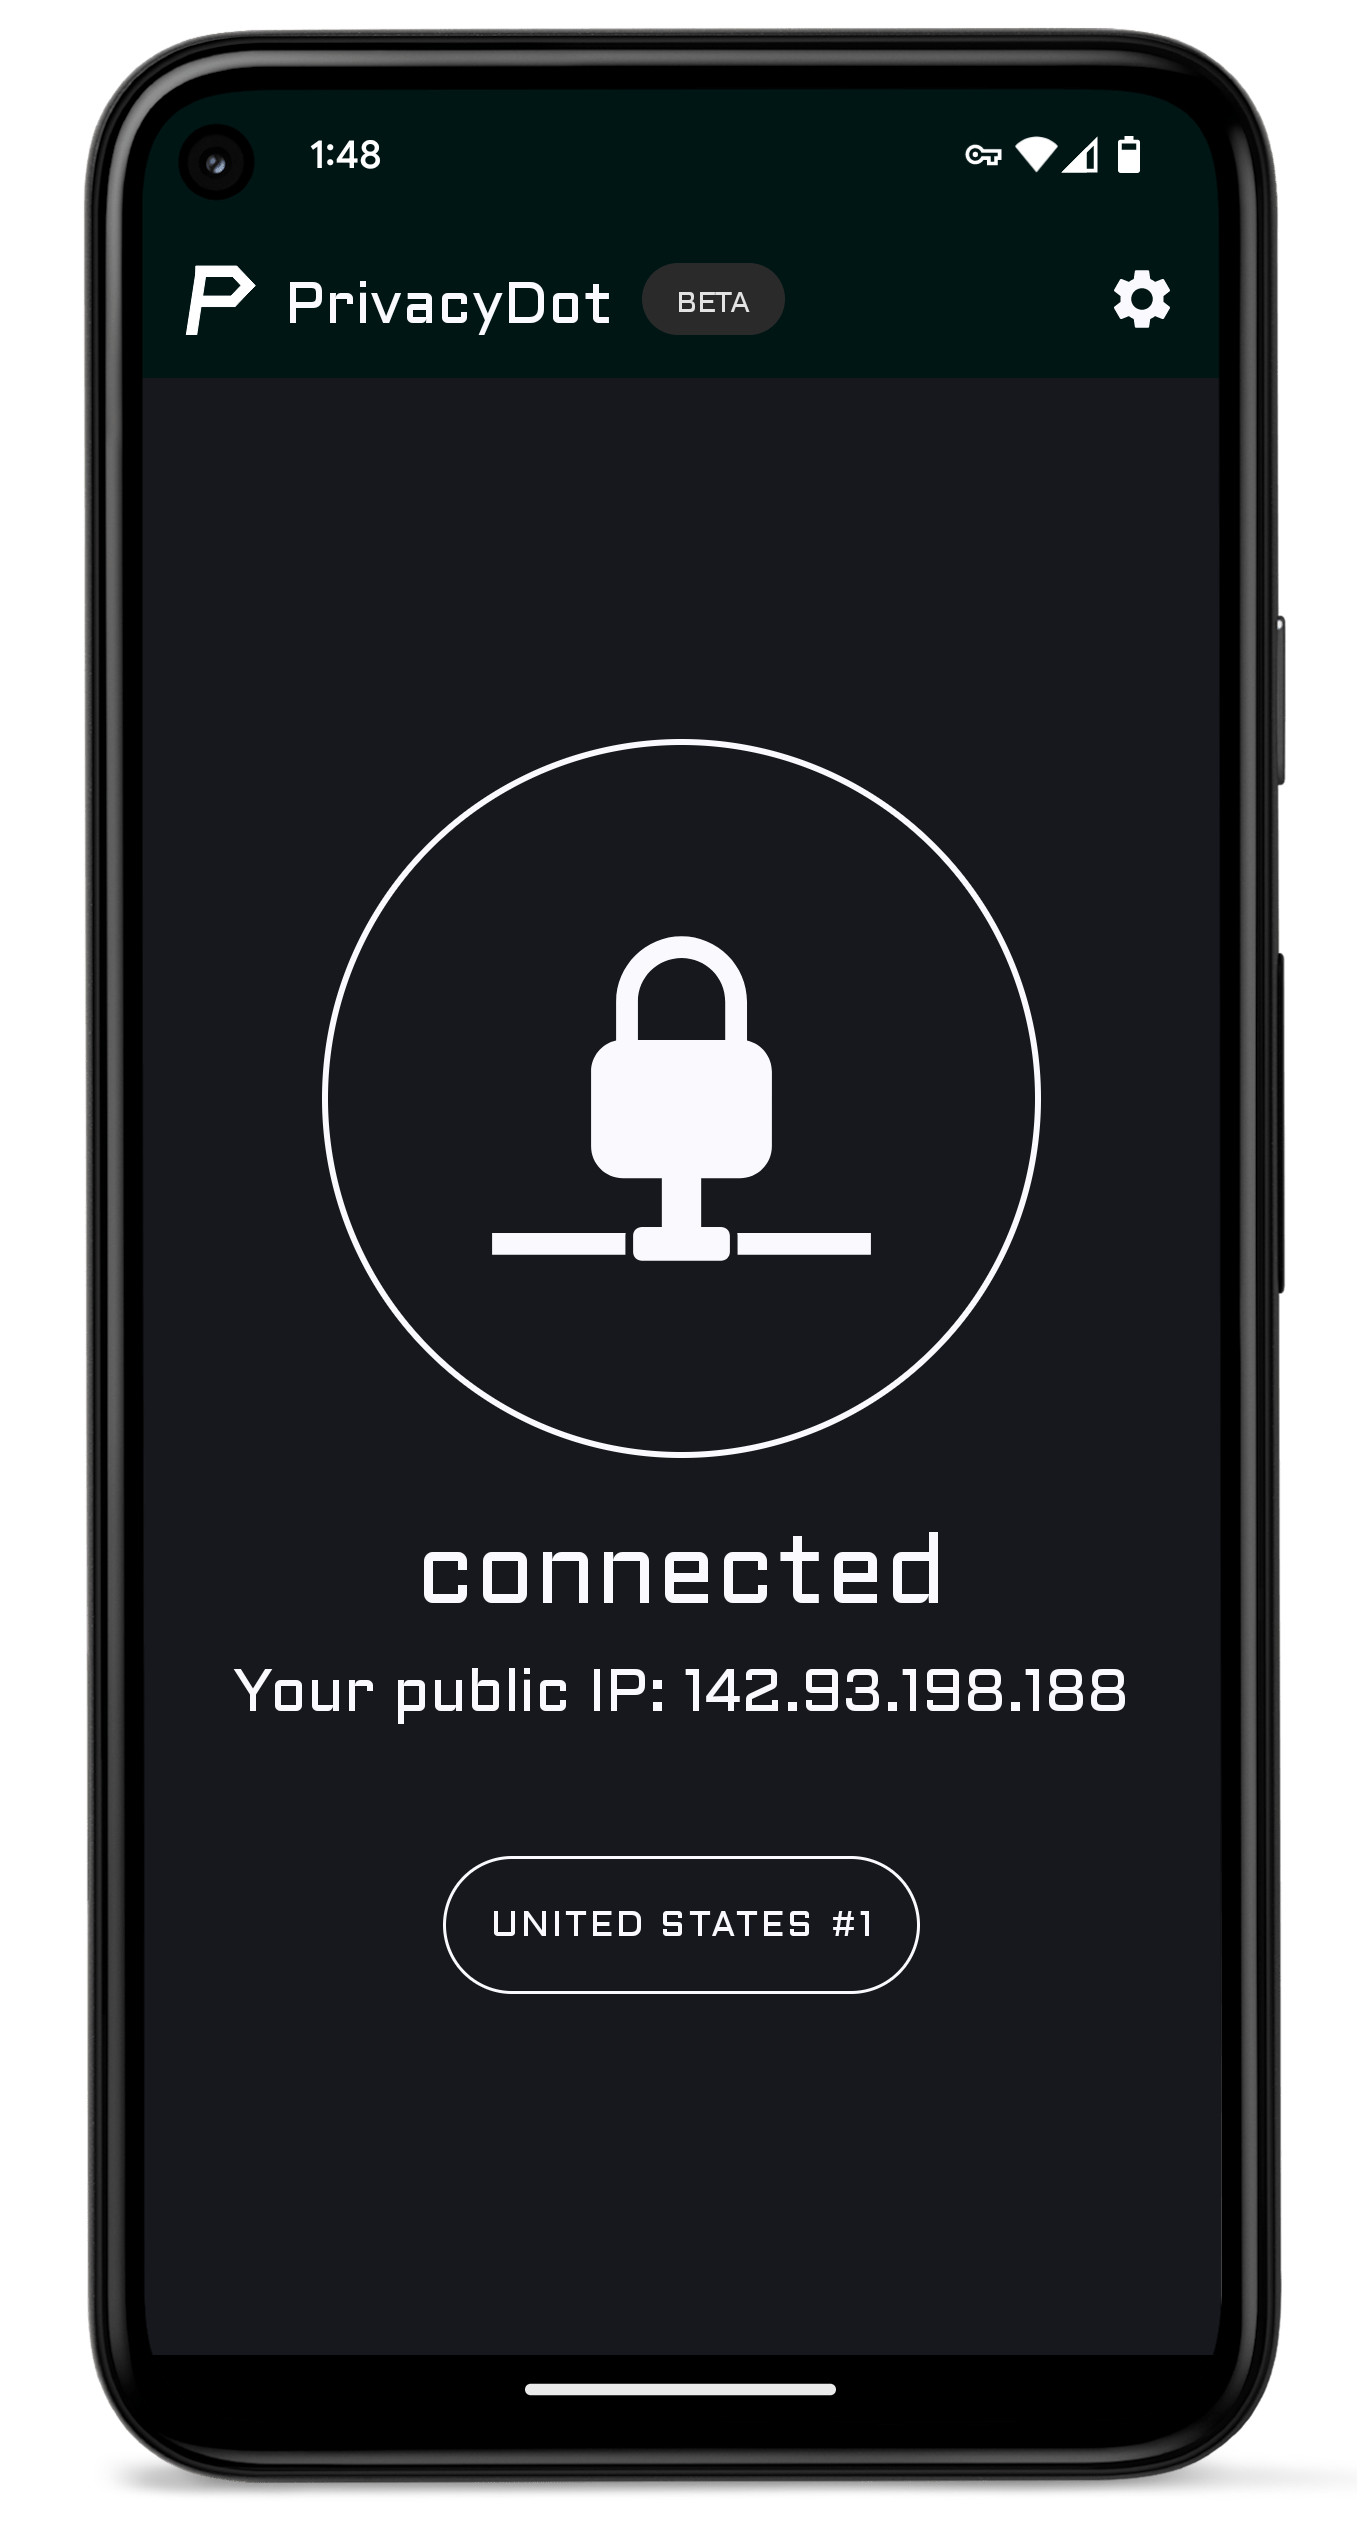 PrivacyDot for android app screenshot on a real device